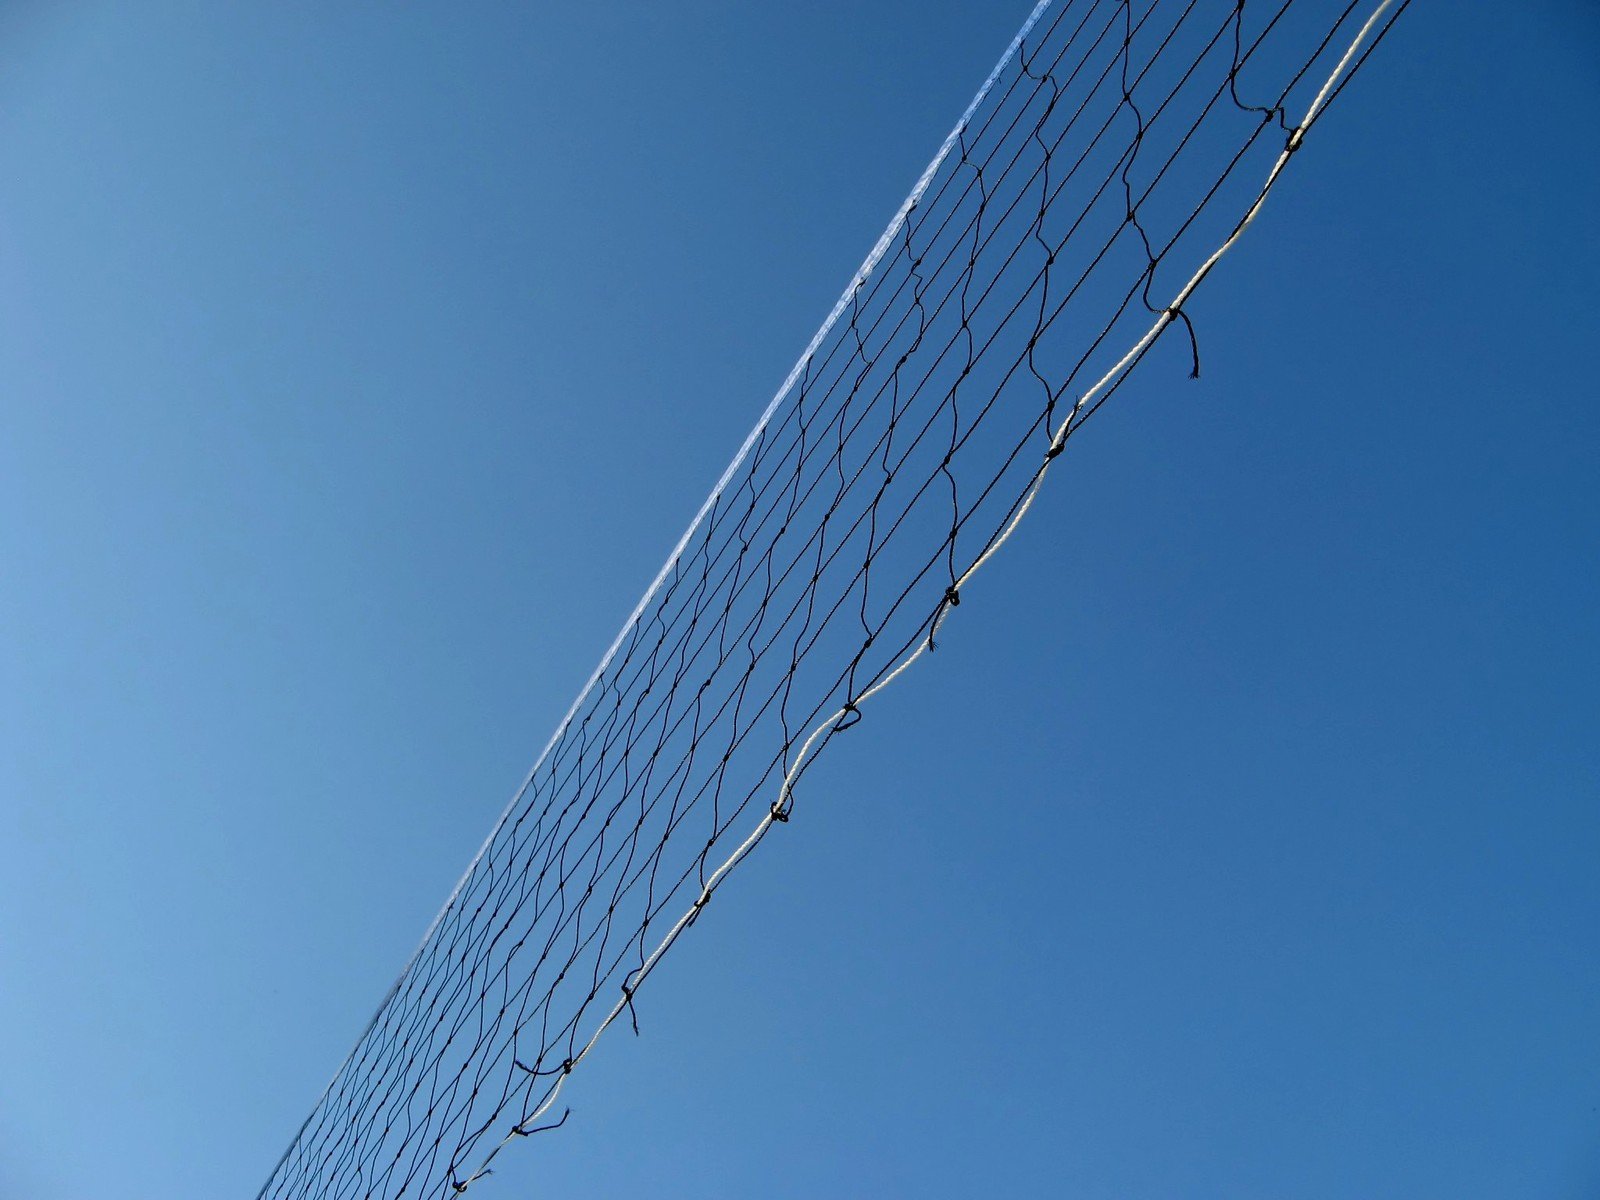 a wire and a clear blue sky in the background